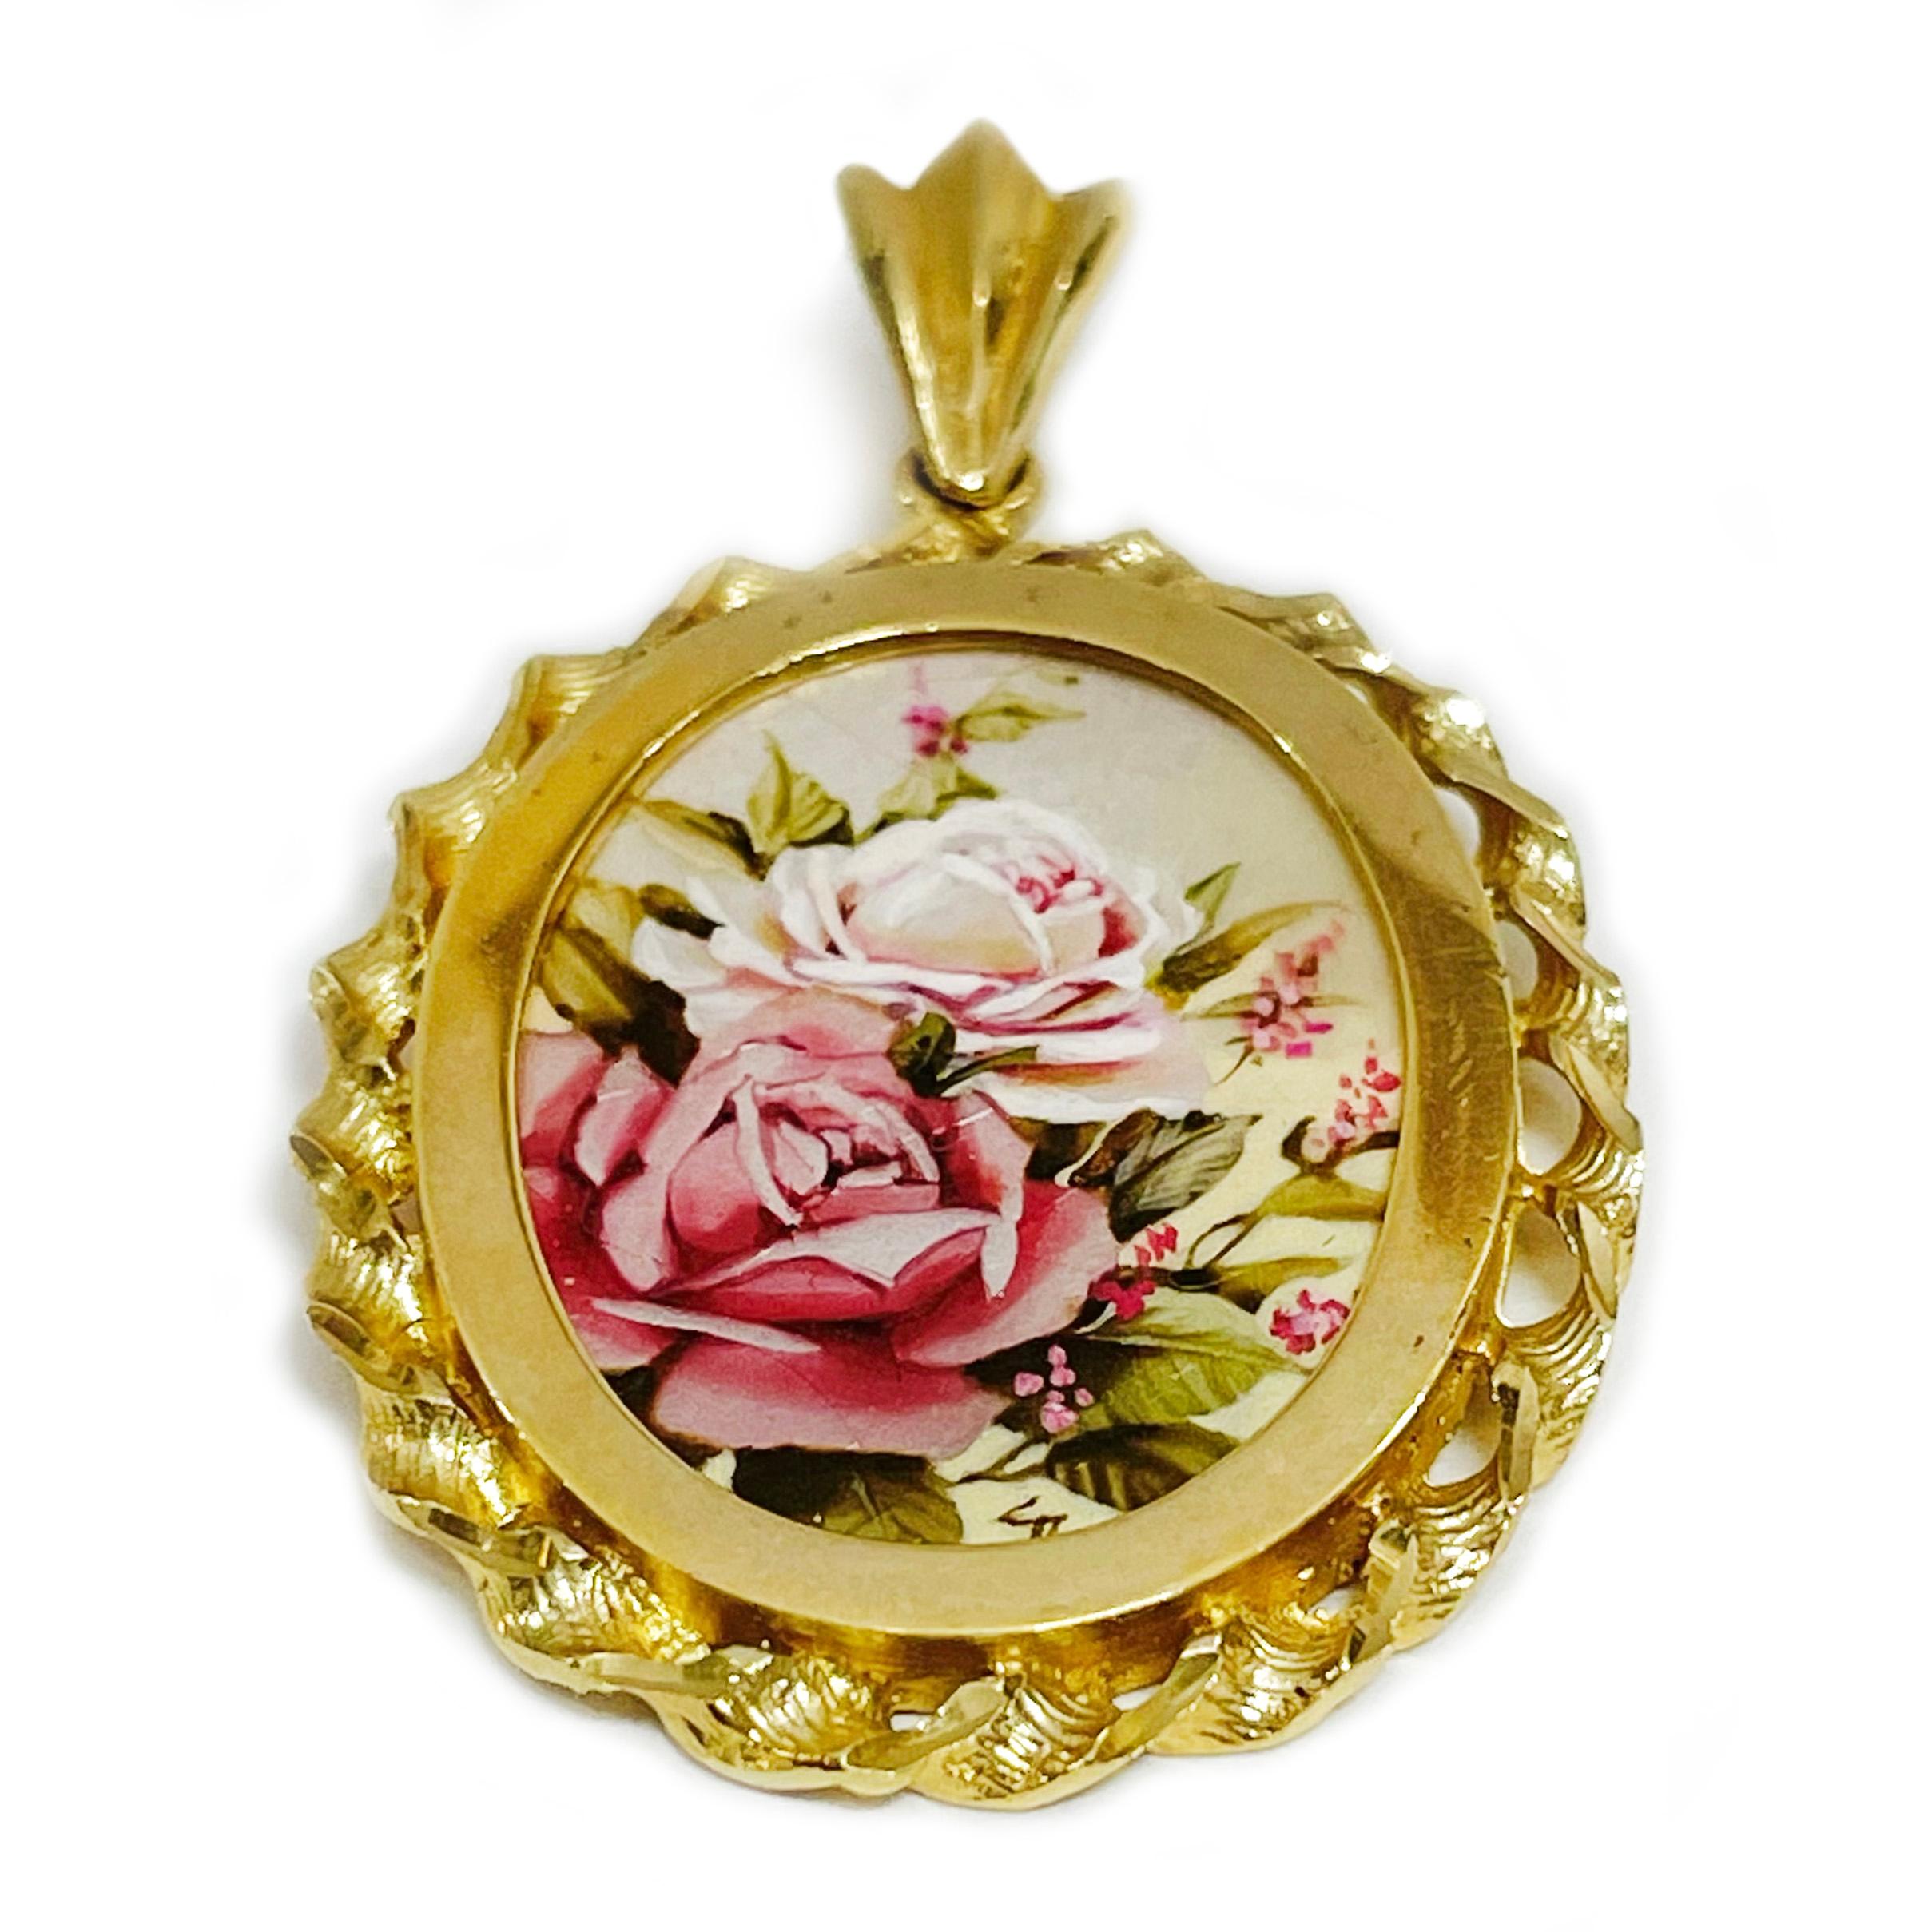 14 Karat Yellow Gold Roses Hand Painted on a Mother of Pearl Pendant. The painting features peach and pink roses with a pale pink background. The miniature painting is set in a 14 karat gold ornate oval frame with diamond-cut details. The painting